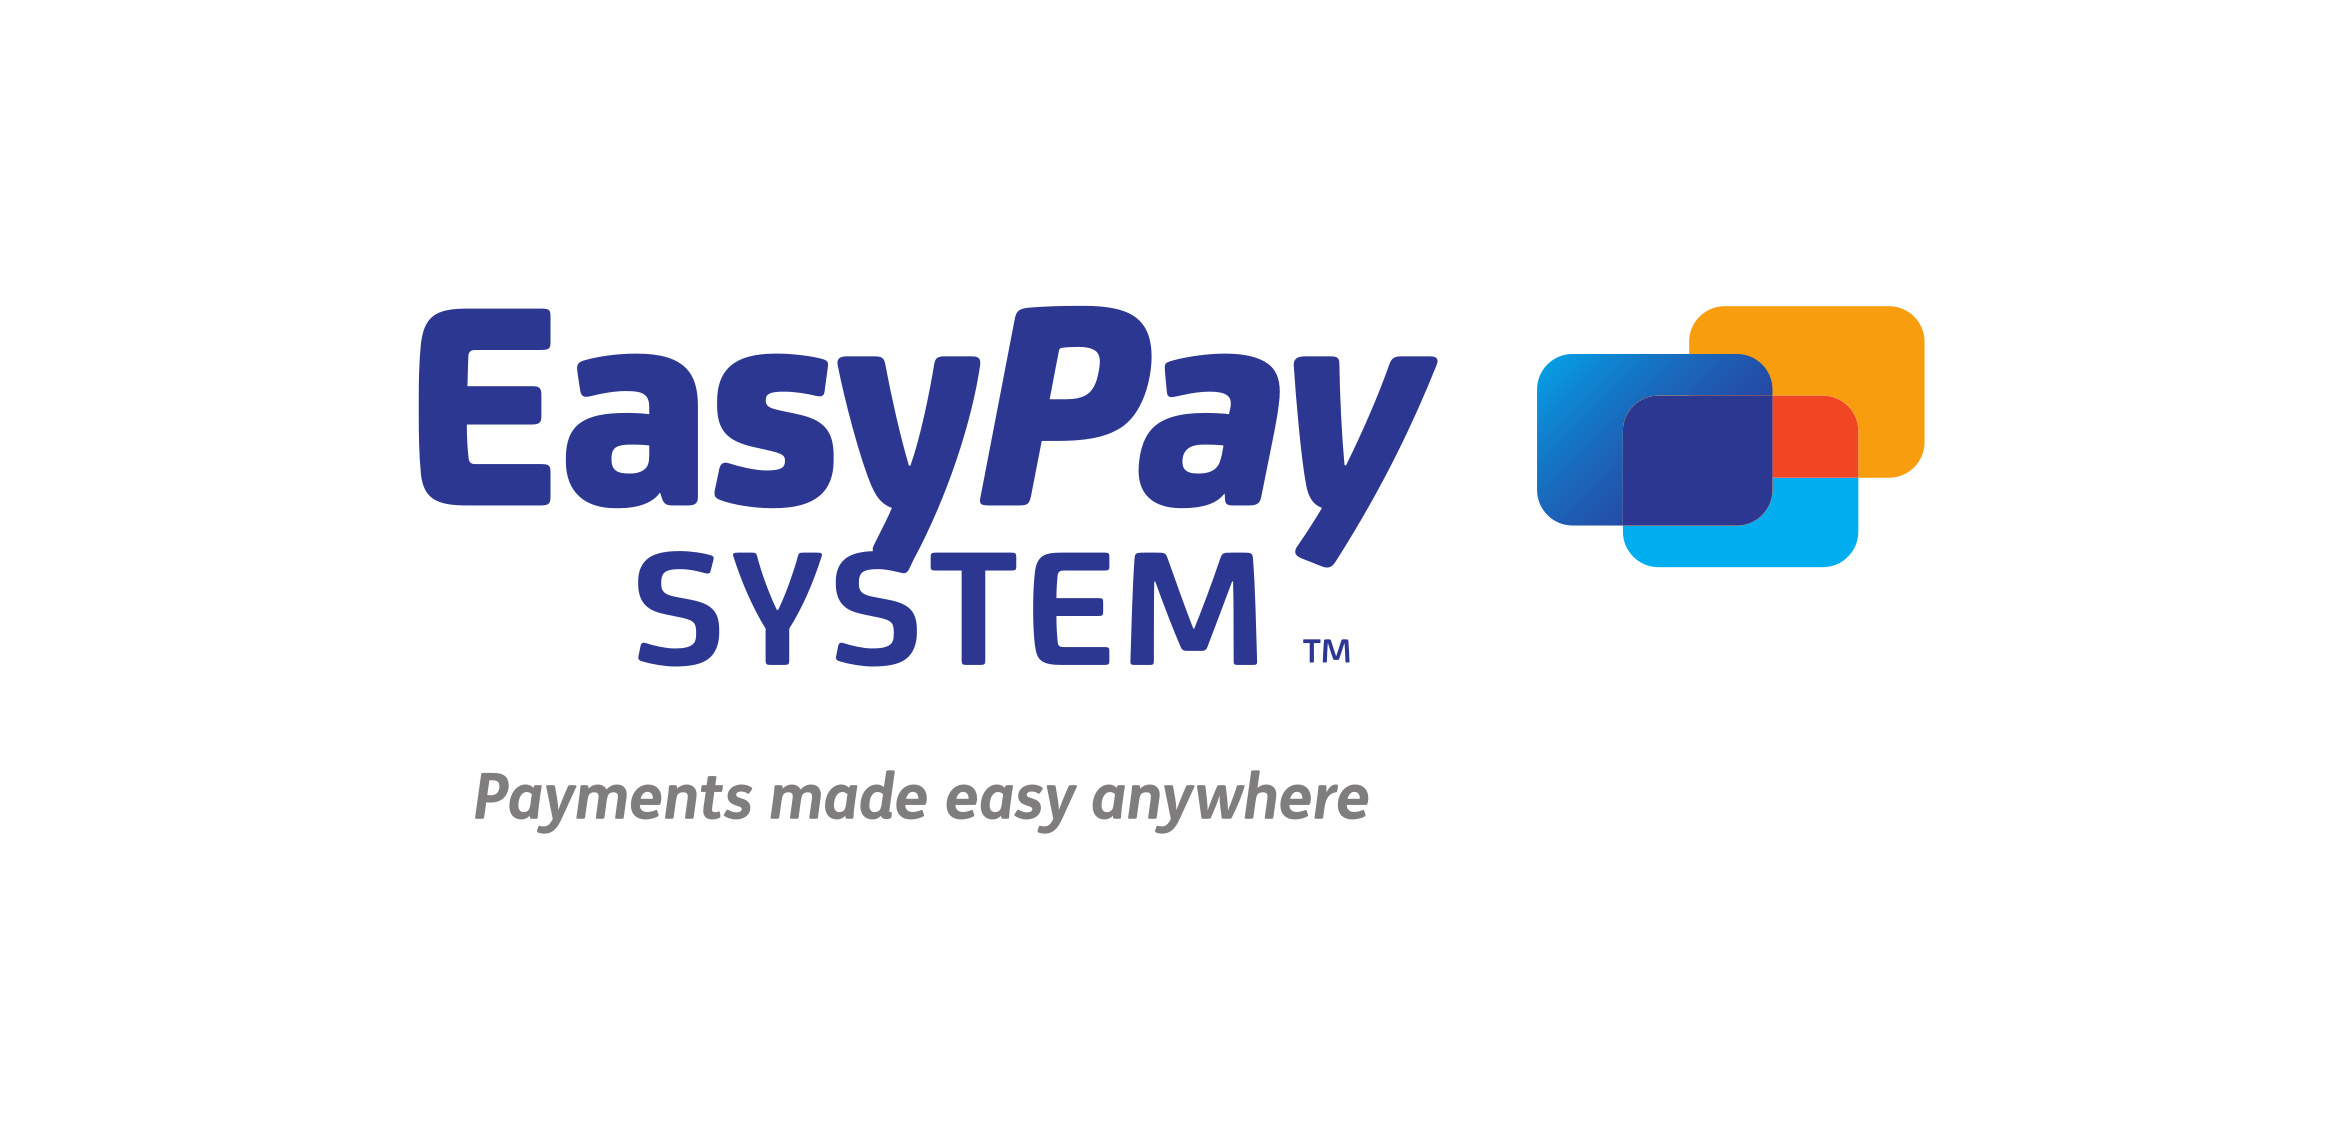 Easy Pay System